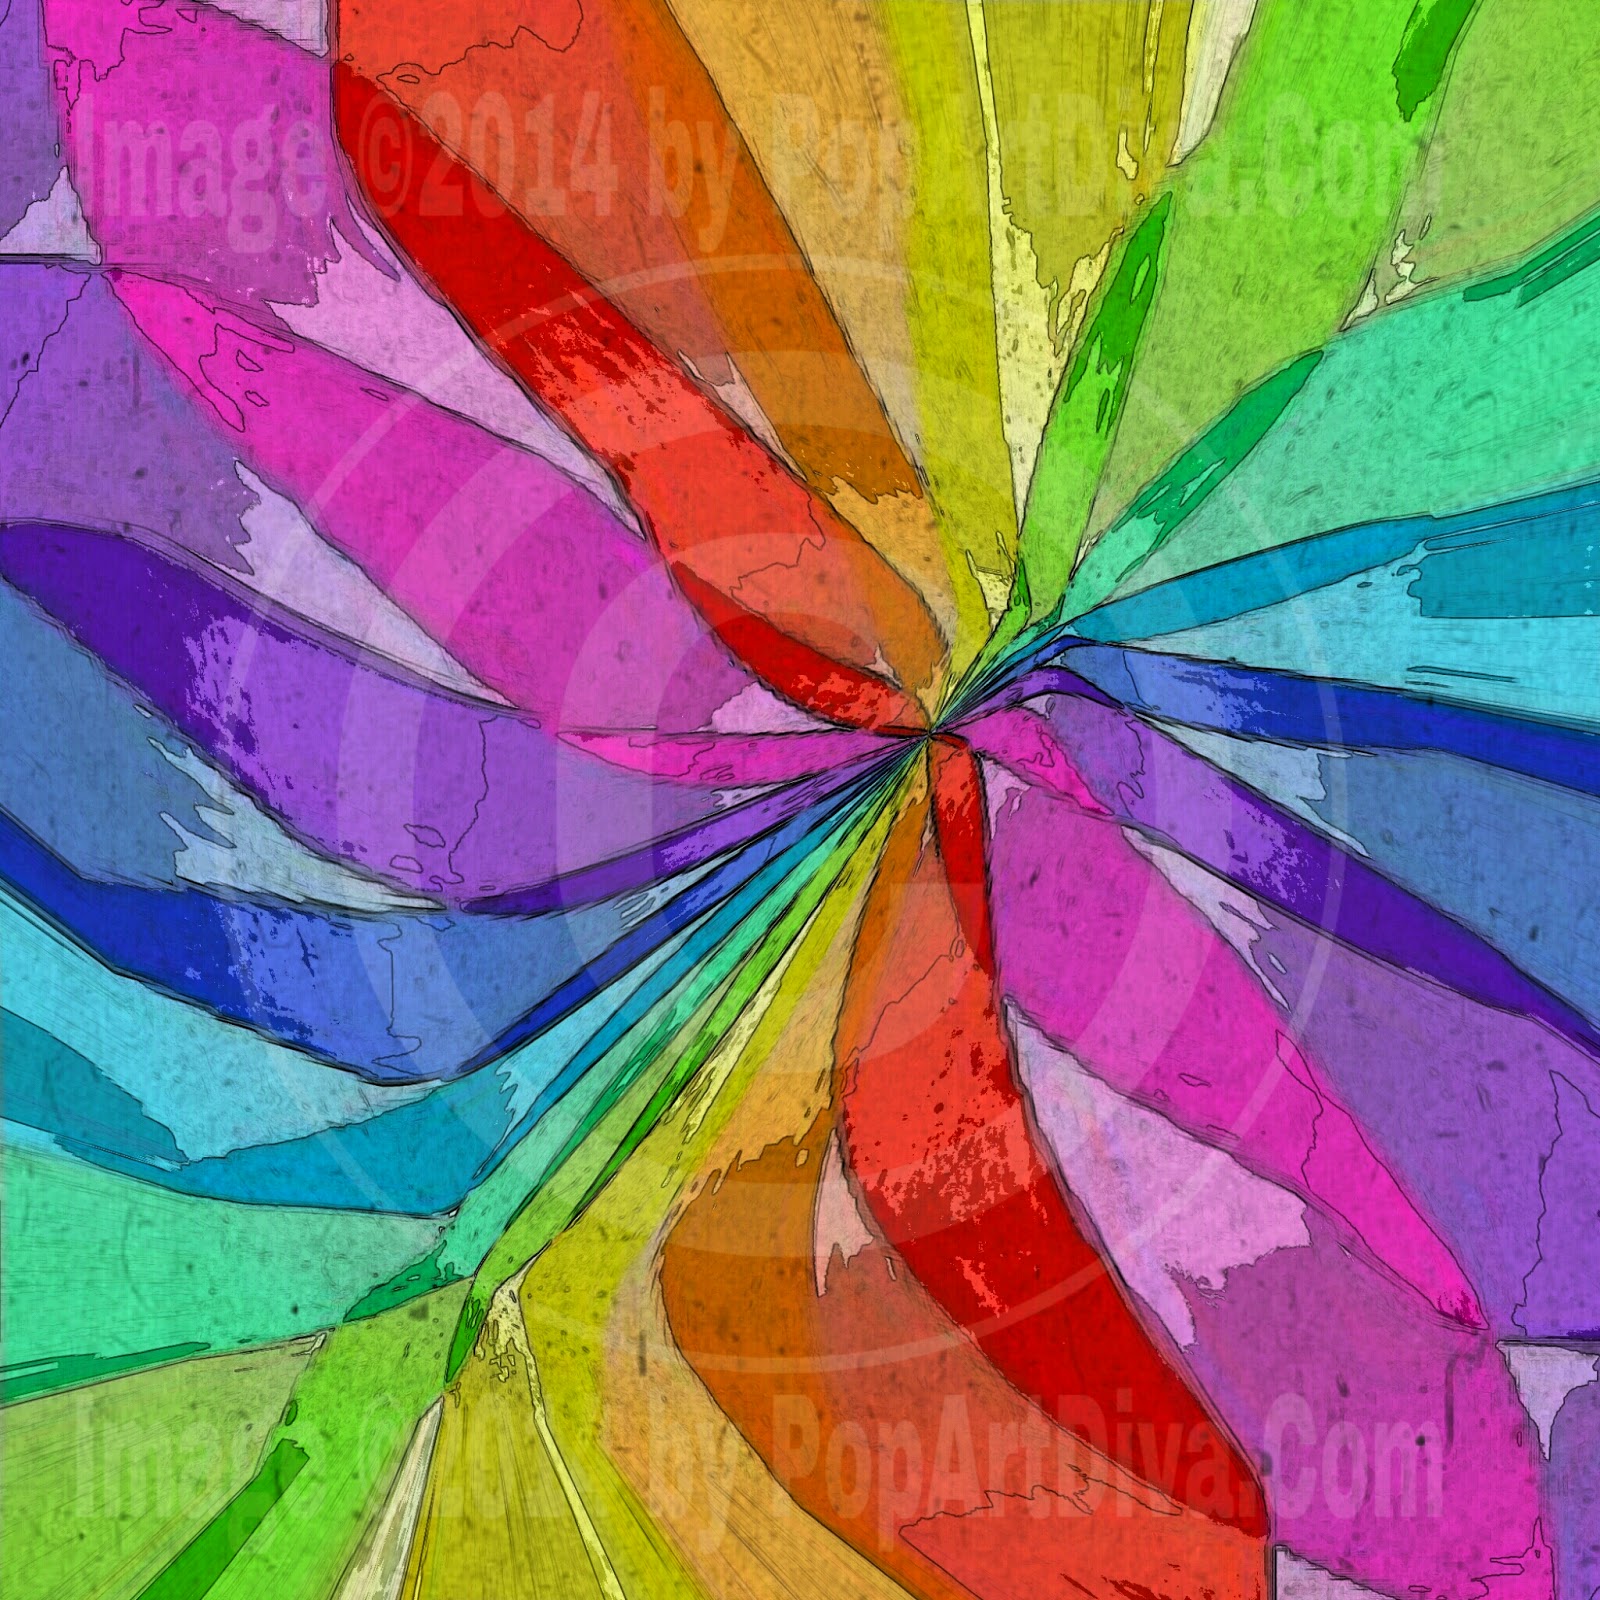 http://store.payloadz.com/details/2084279-photos-and-images-backgrounds-kaleidoscope-abstract-web-graphic.html